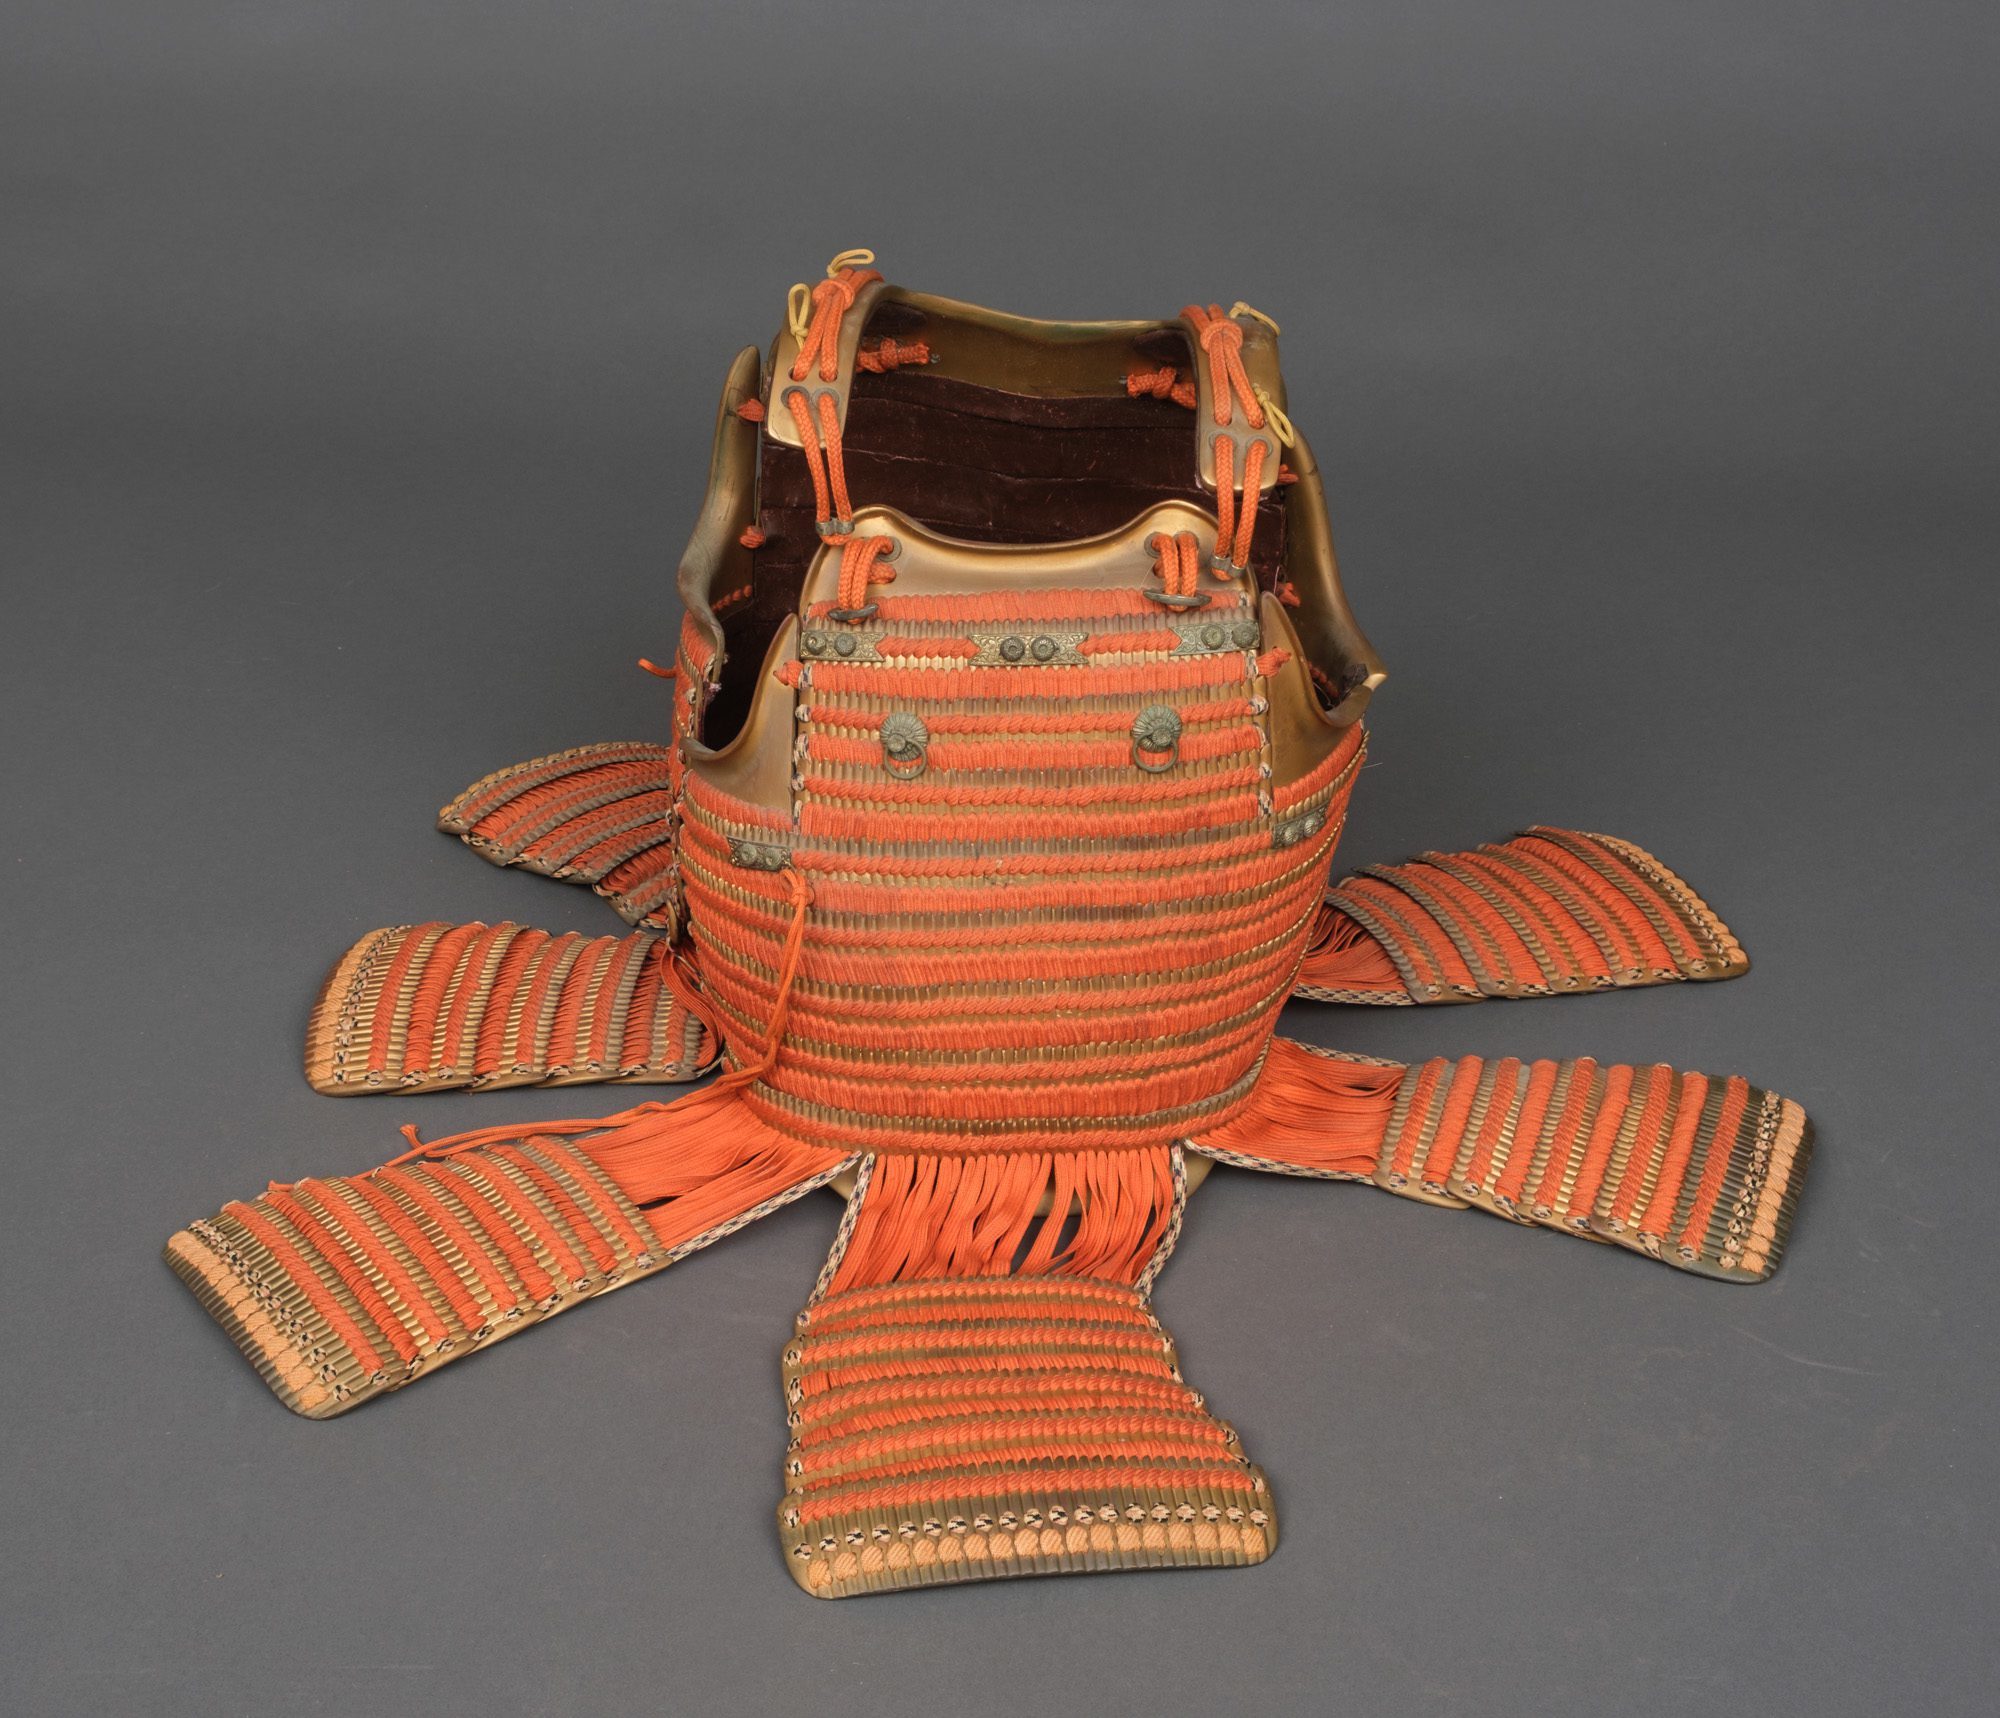 A JAPANESE GOLD LACQUER METAL SUIT-OF-ARMOUR (Ô’YOROI), SECOND HALF 18TH CENTURY (EDO PERIOD) - Image 5 of 5